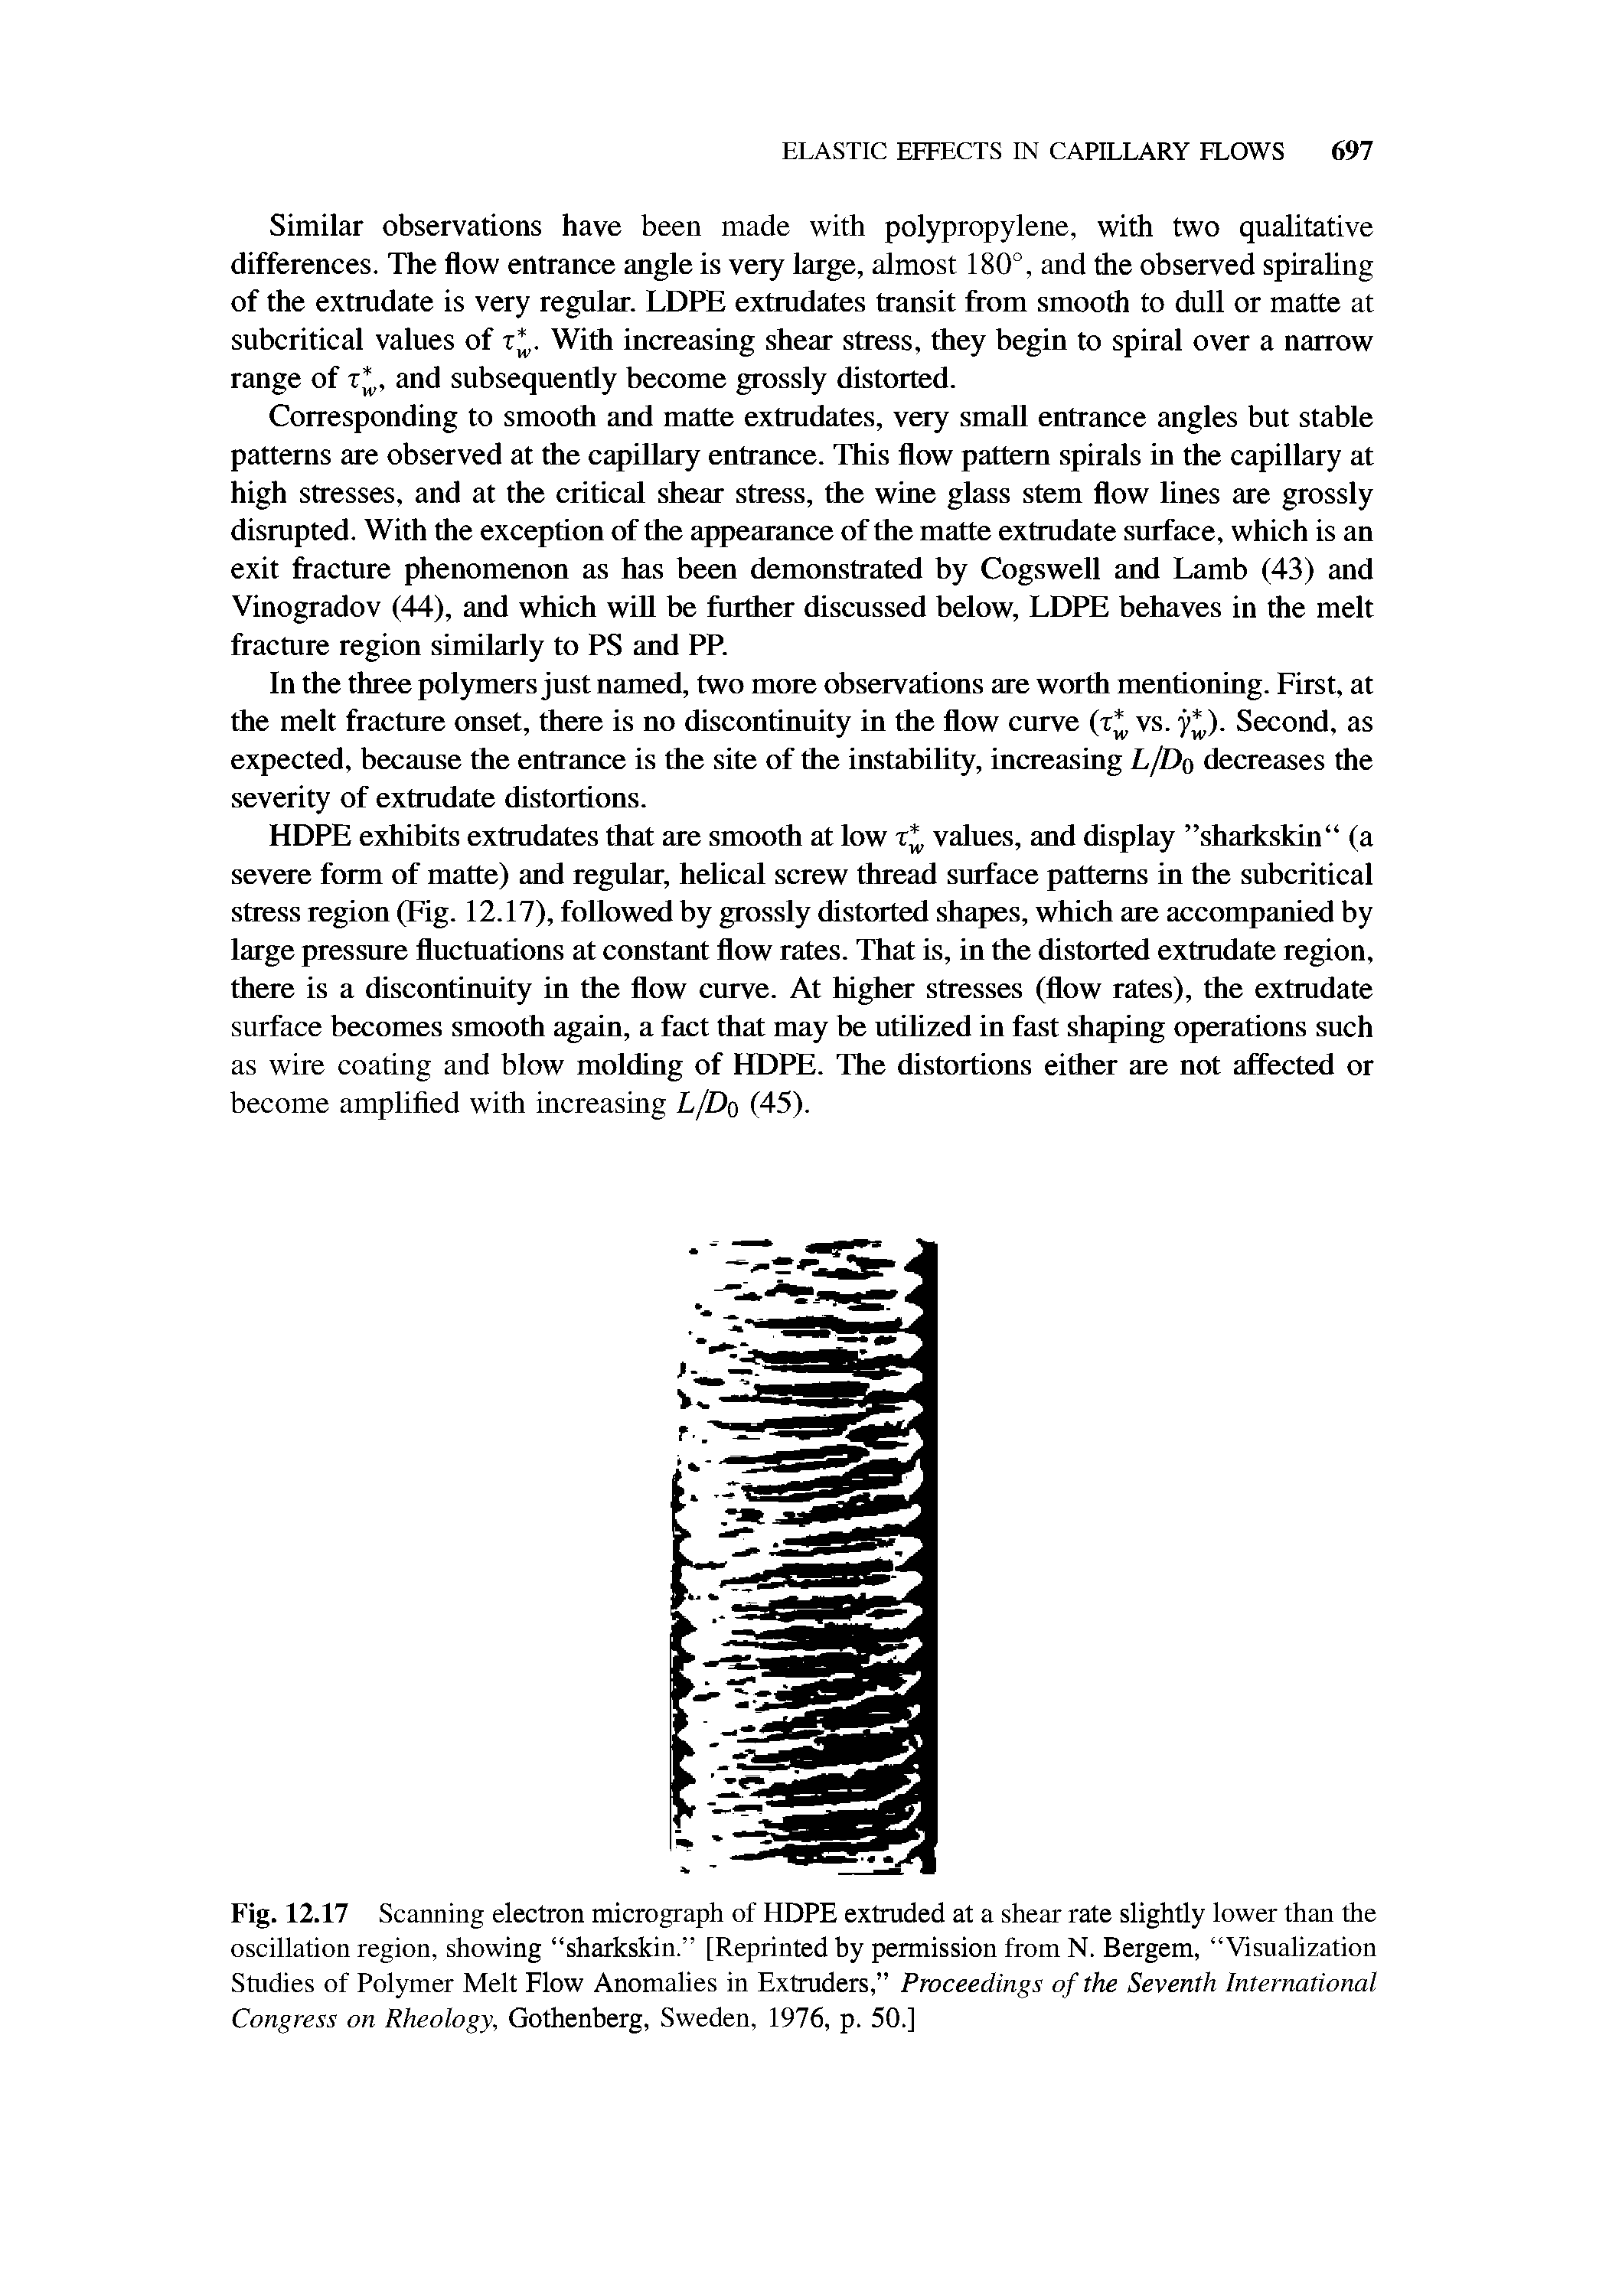 Fig. 12.17 Scanning electron micrograph of HDPE extruded at a shear rate slightly lower than the oscillation region, showing sharkskin. [Reprinted by permission from N. Bergem, Visualization Studies of Polymer Melt Flow Anomalies in Extruders, Proceedings of the Seventh International Congress on Rheology, Gothenberg, Sweden, 1976, p. 50.]...